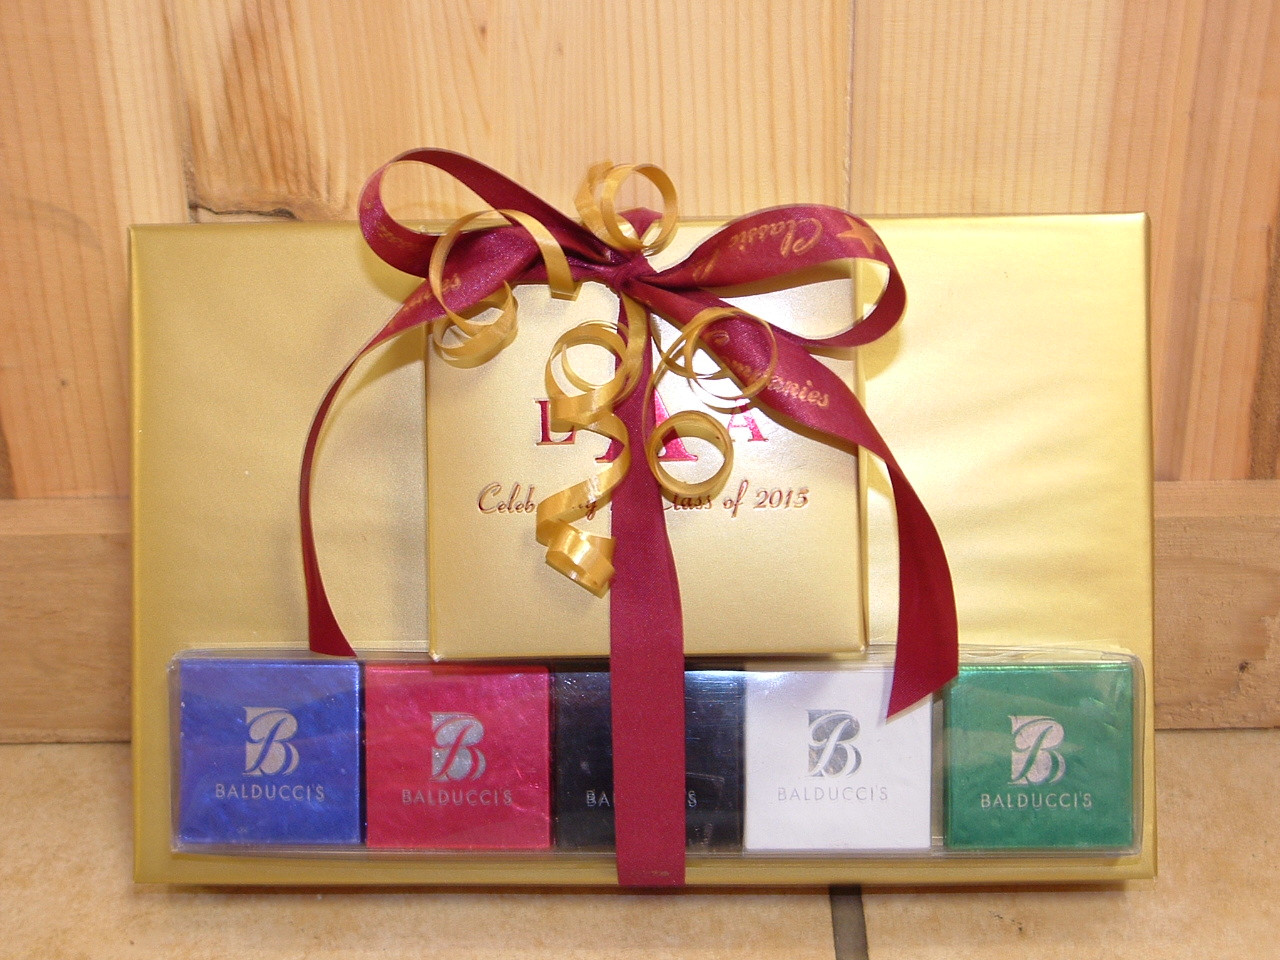 Company Christmas Gift Ideas
 Great Corporate Holiday Gift Ideas of Chocolate and or